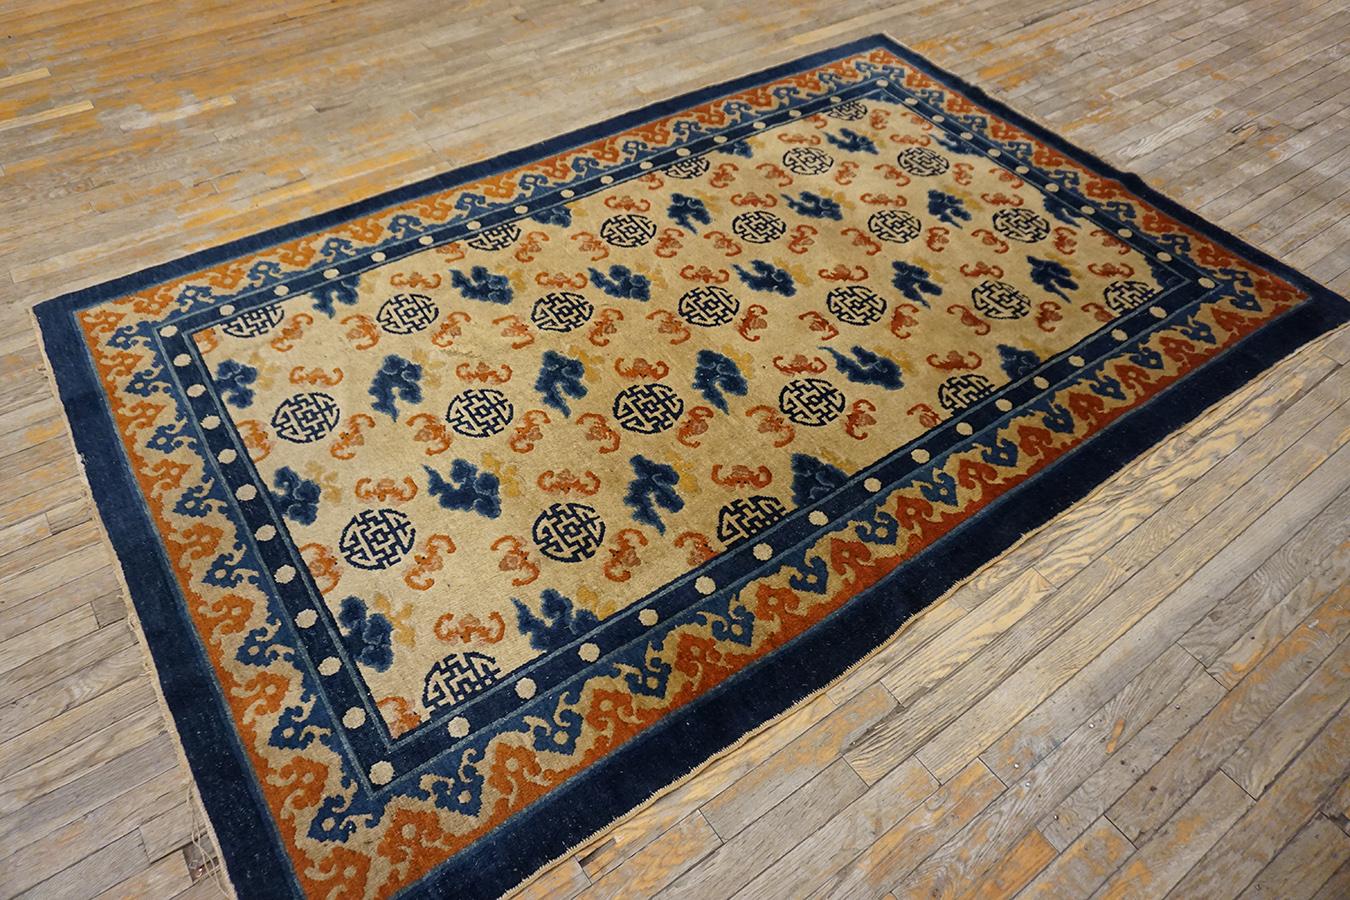 Hand-Knotted Late 19th Century W. Chinese Kansu Carpet ( 5'2